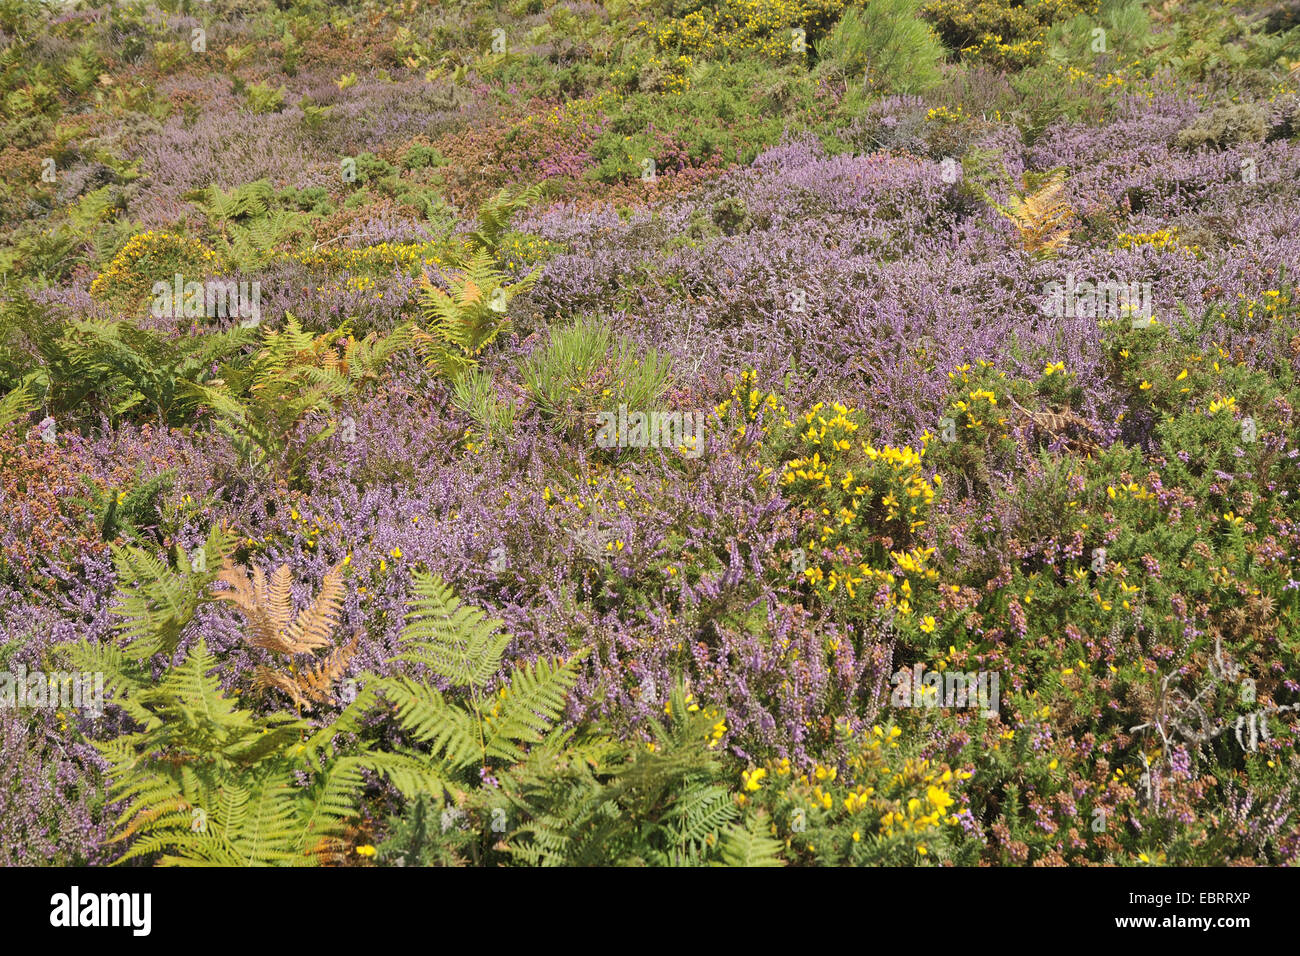 blooming heath, furze and fern, France, Brittany, Erquy Stock Photo